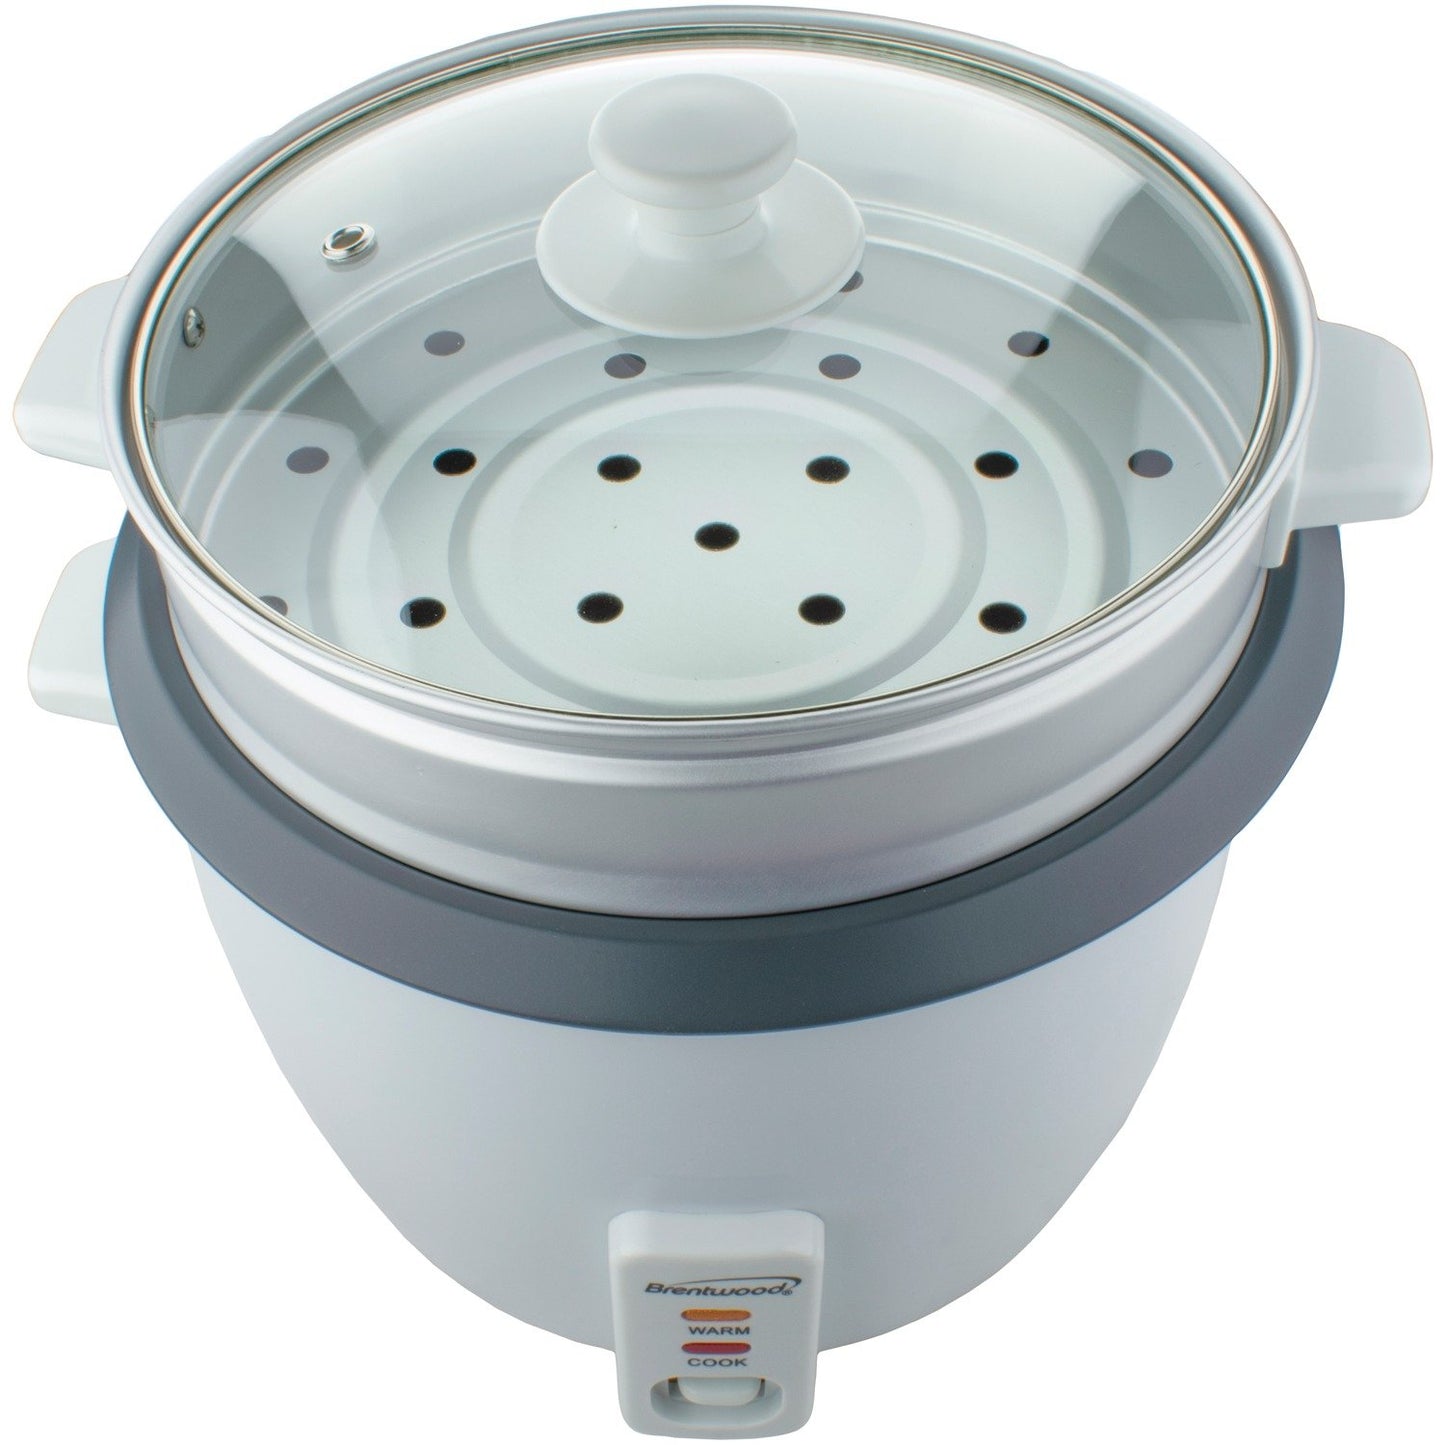 Brentwood Appl. TS-380S Rice Cooker w/Steamer (10 Cups, 700W)